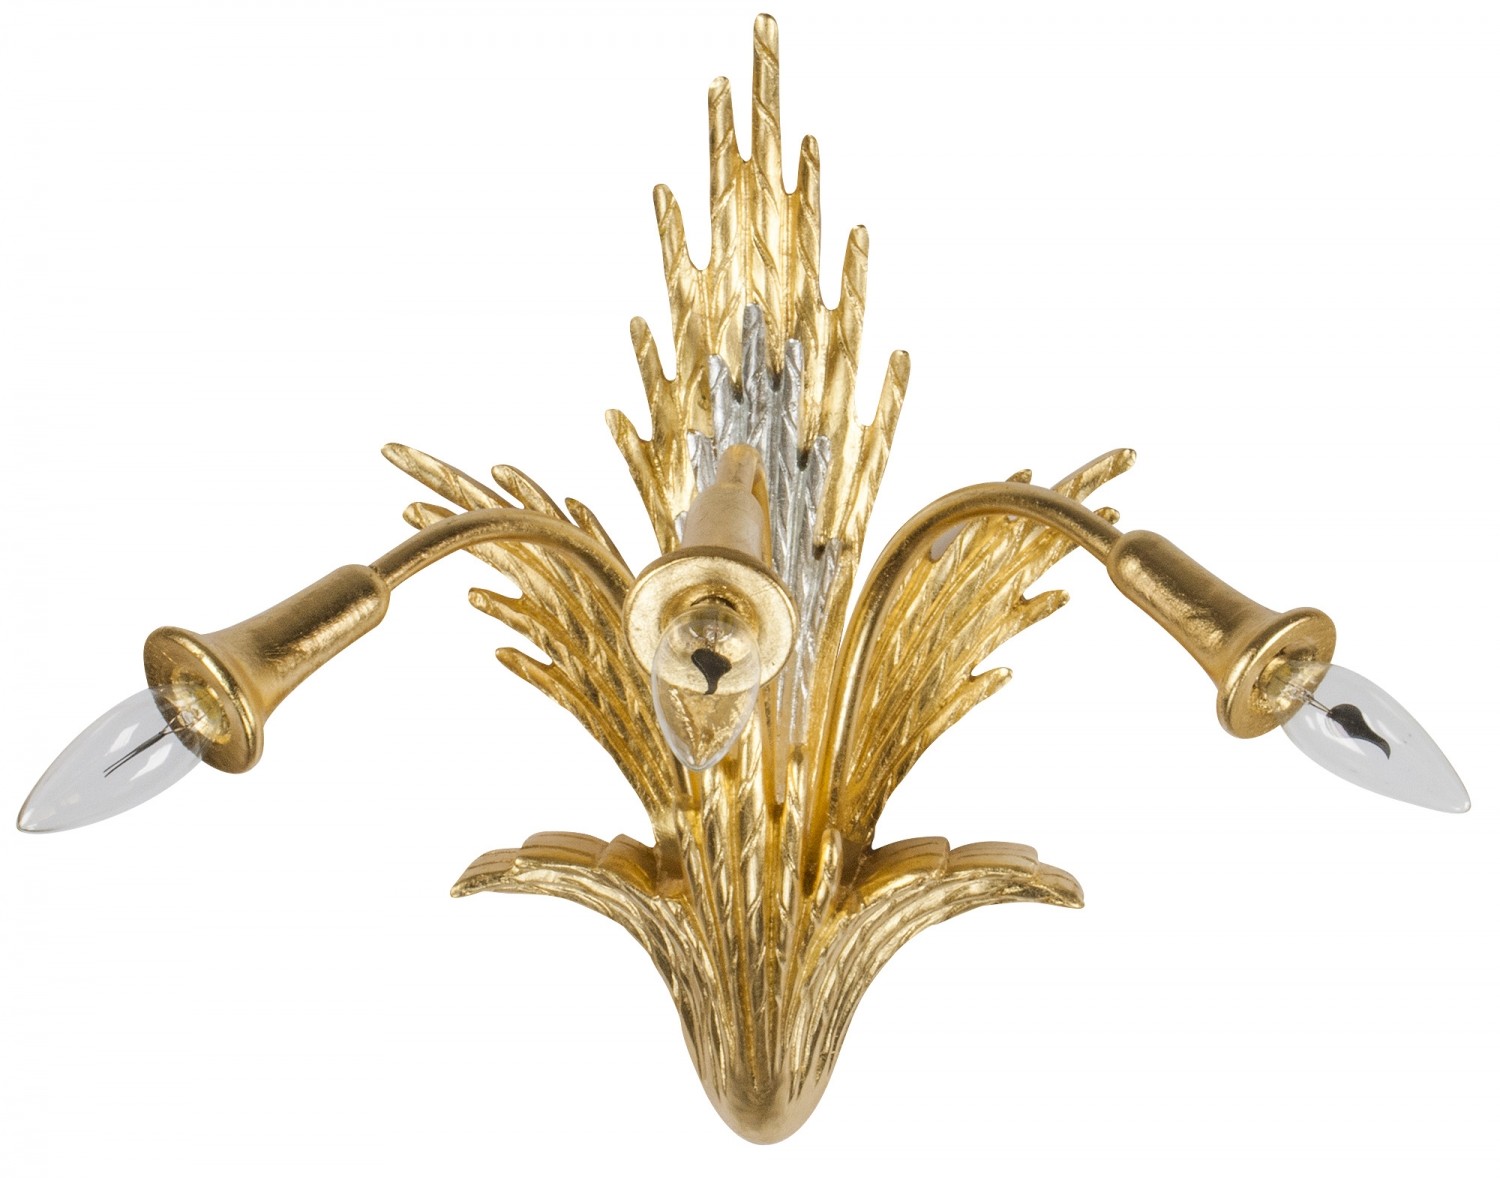 Anna Antique Bronze Candle Wall Sconce - World Market